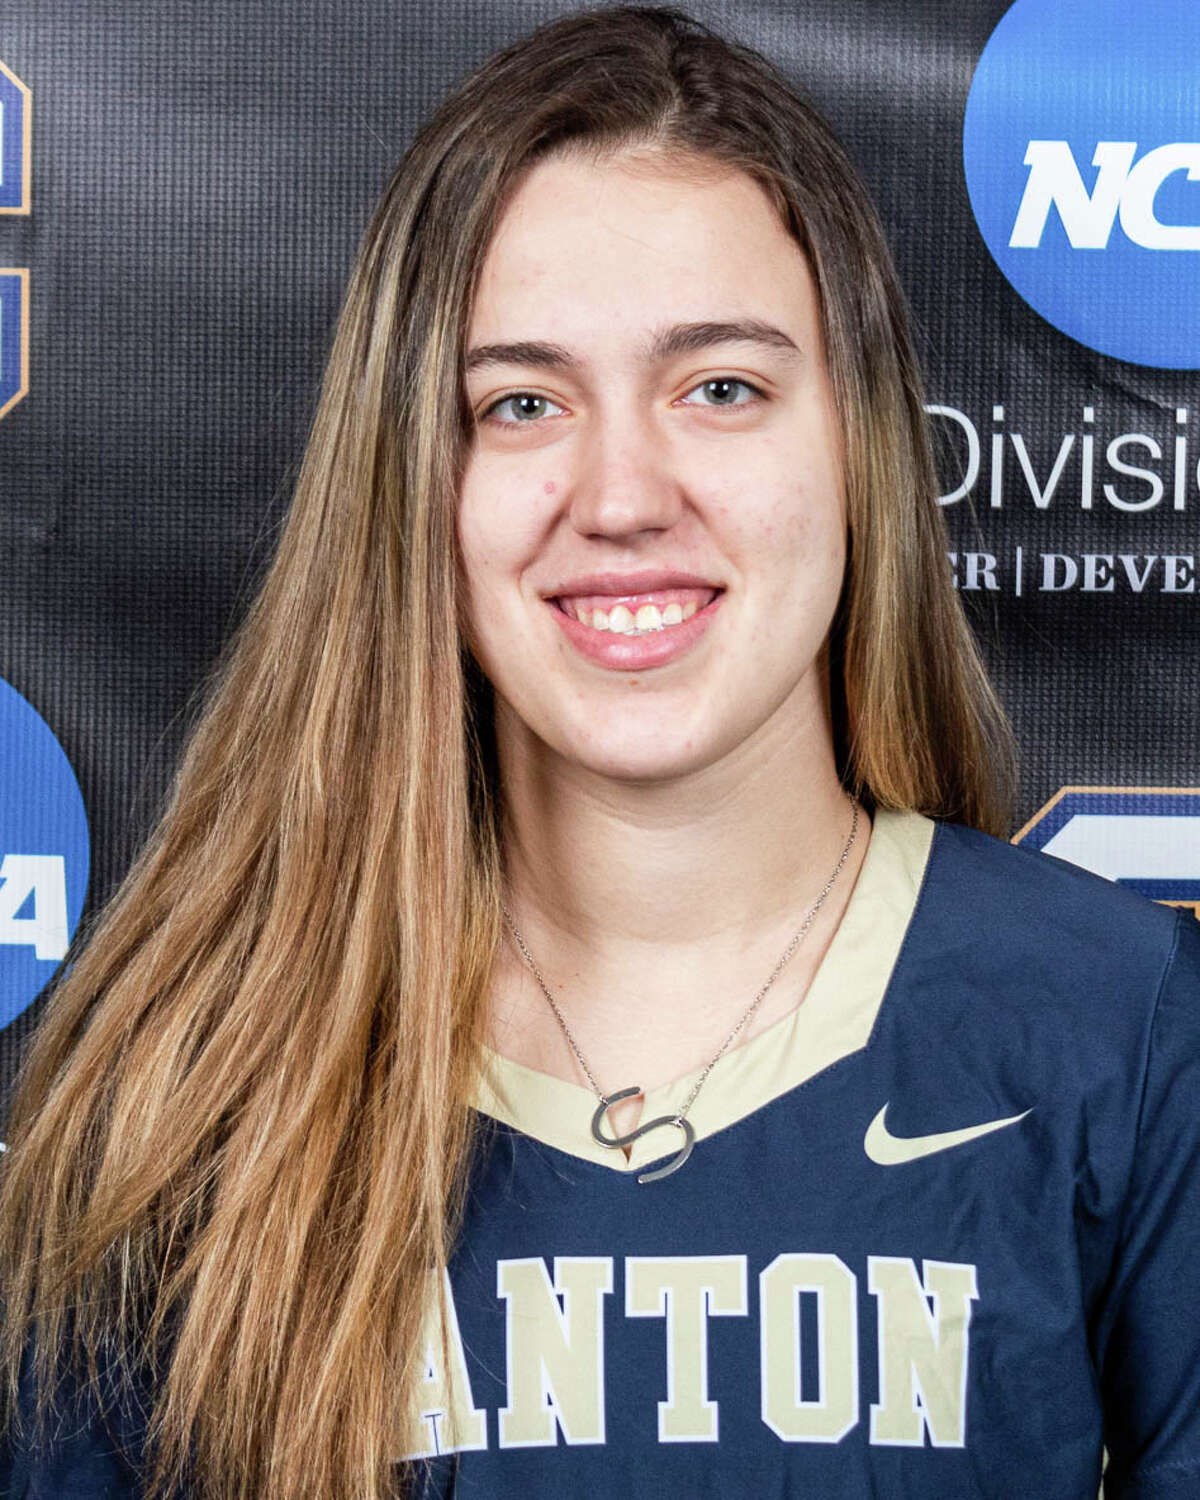 Samantha Dayter, from Cohoes, is not only the top scorer for the SUNY Canton women’s lacrosse team and the North Atlantic Conference, but the 5-foot-8 junior midfielder is also one of the top offensive performers in Division III.